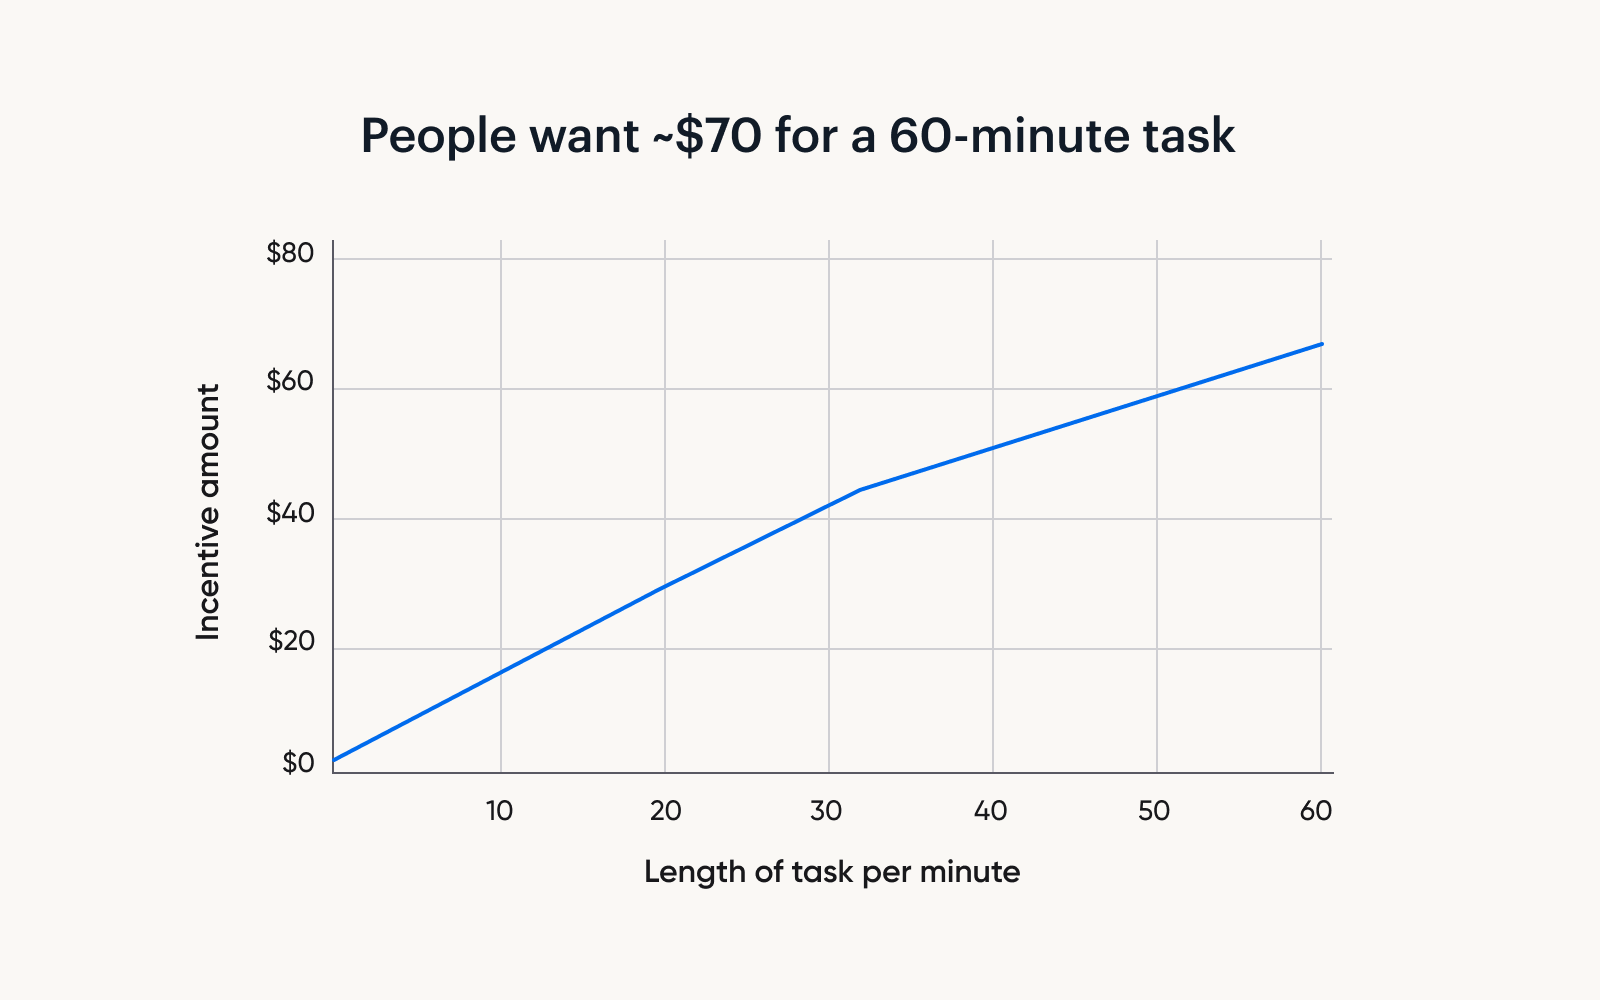 A graph showing that people want $70 for a 60 minute task.